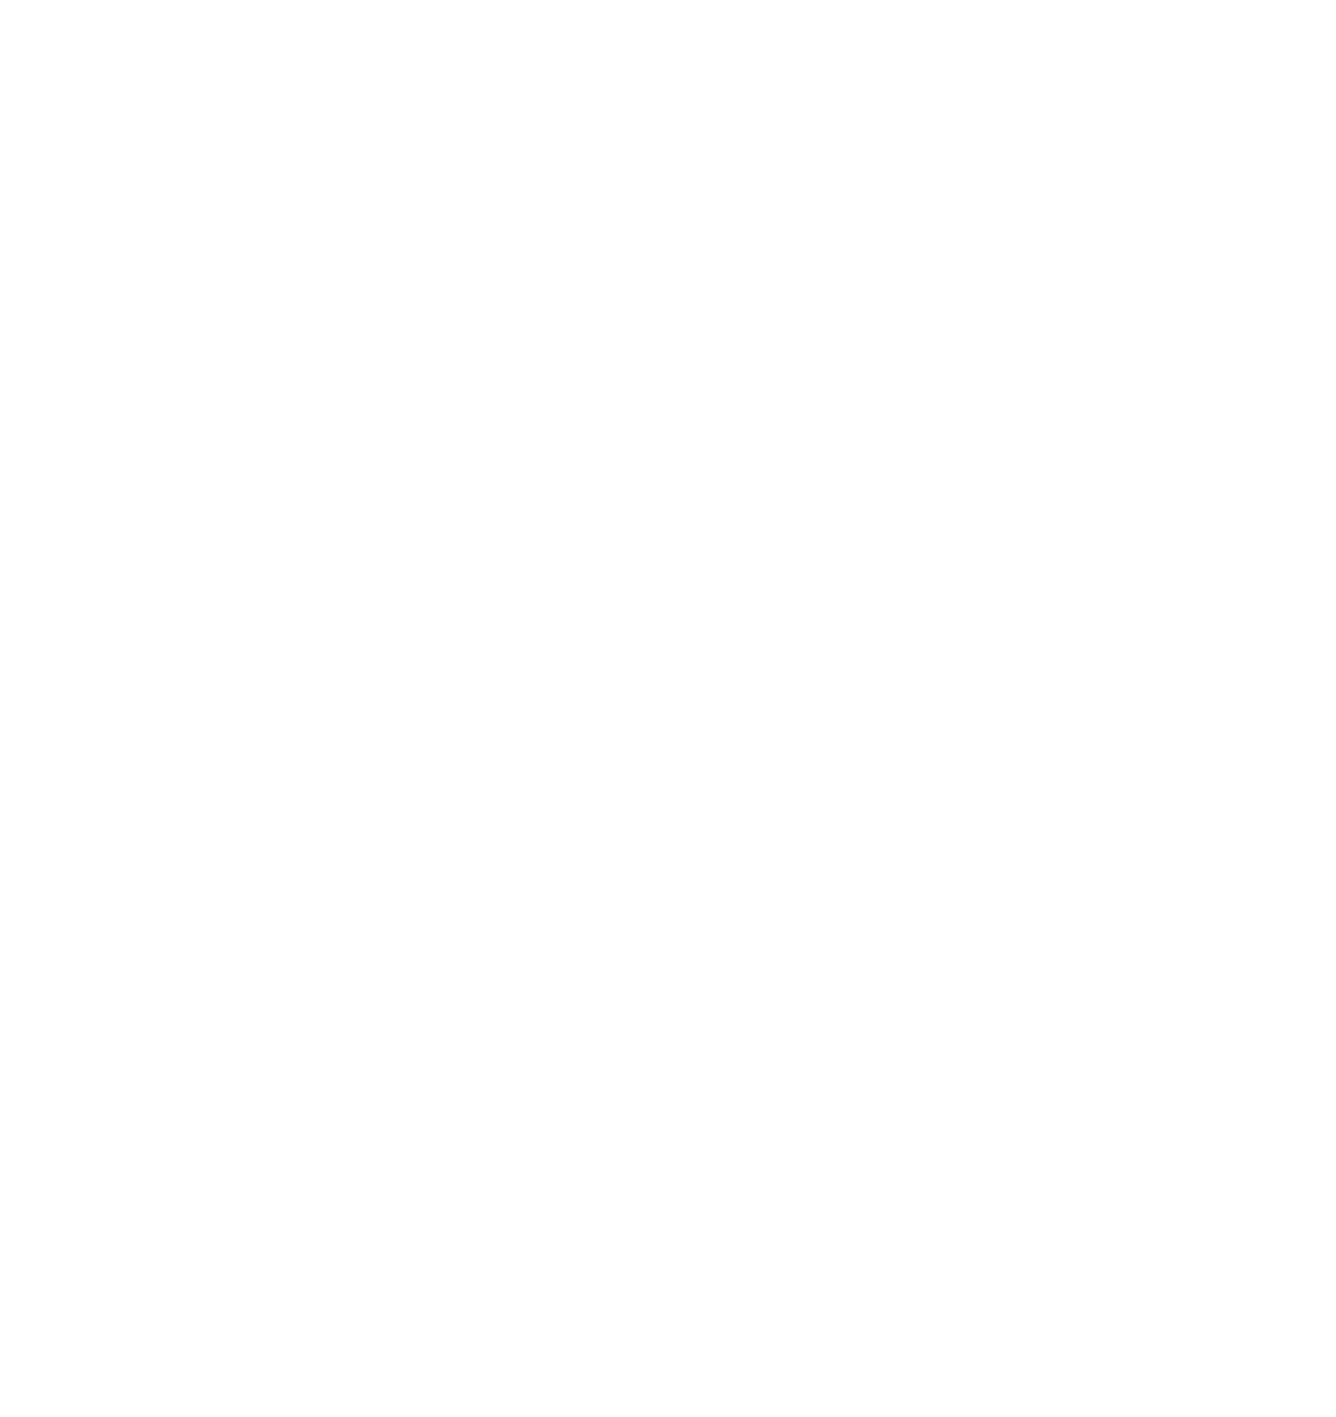 Ansell logo for dark backgrounds (transparent PNG)